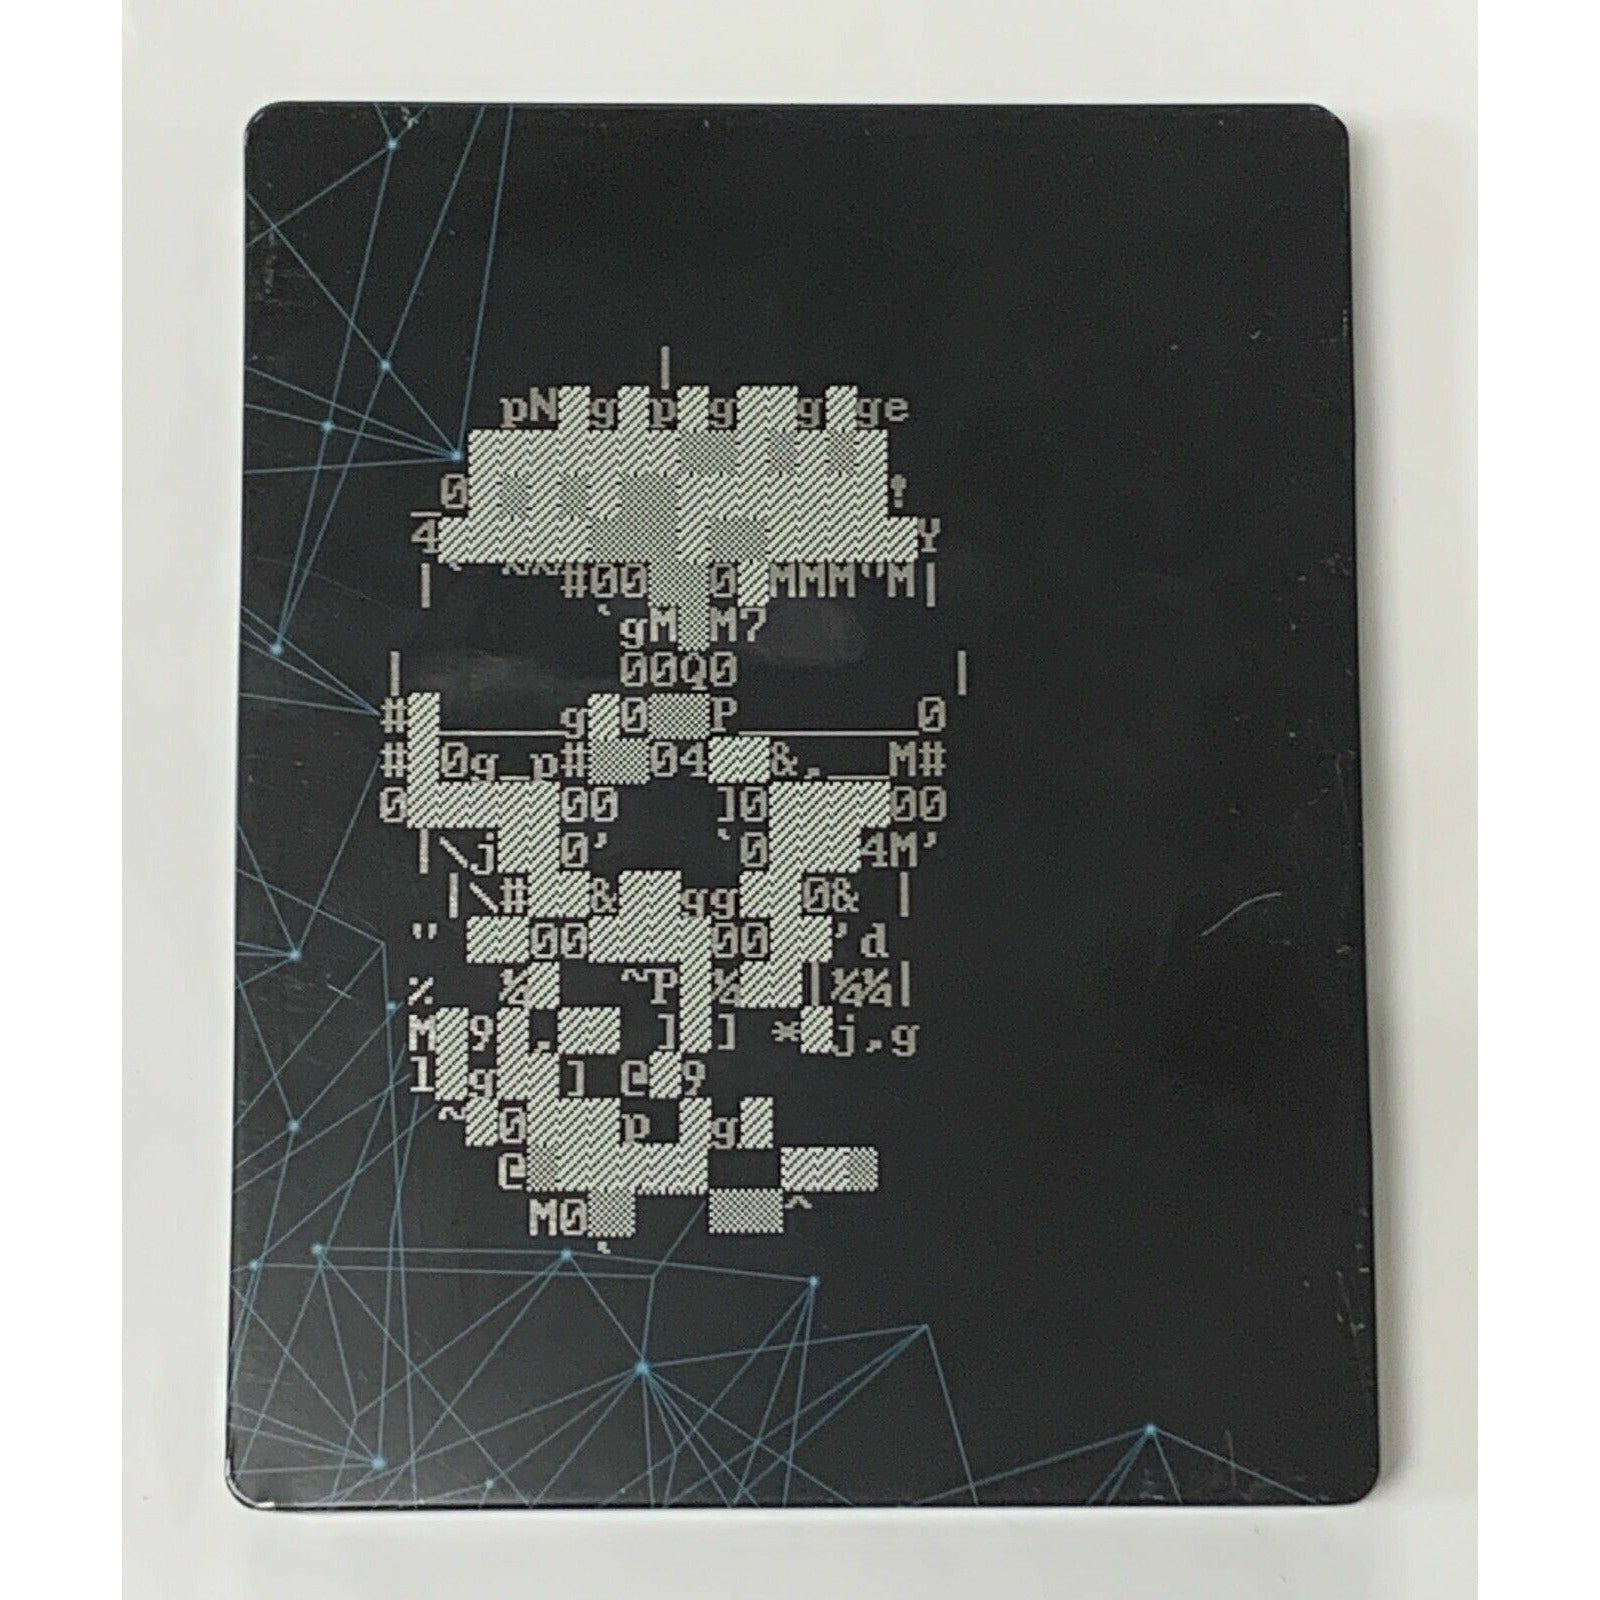 XBOX ONE - Watch Dogs Limited Edition Steelbook + Soundtrack